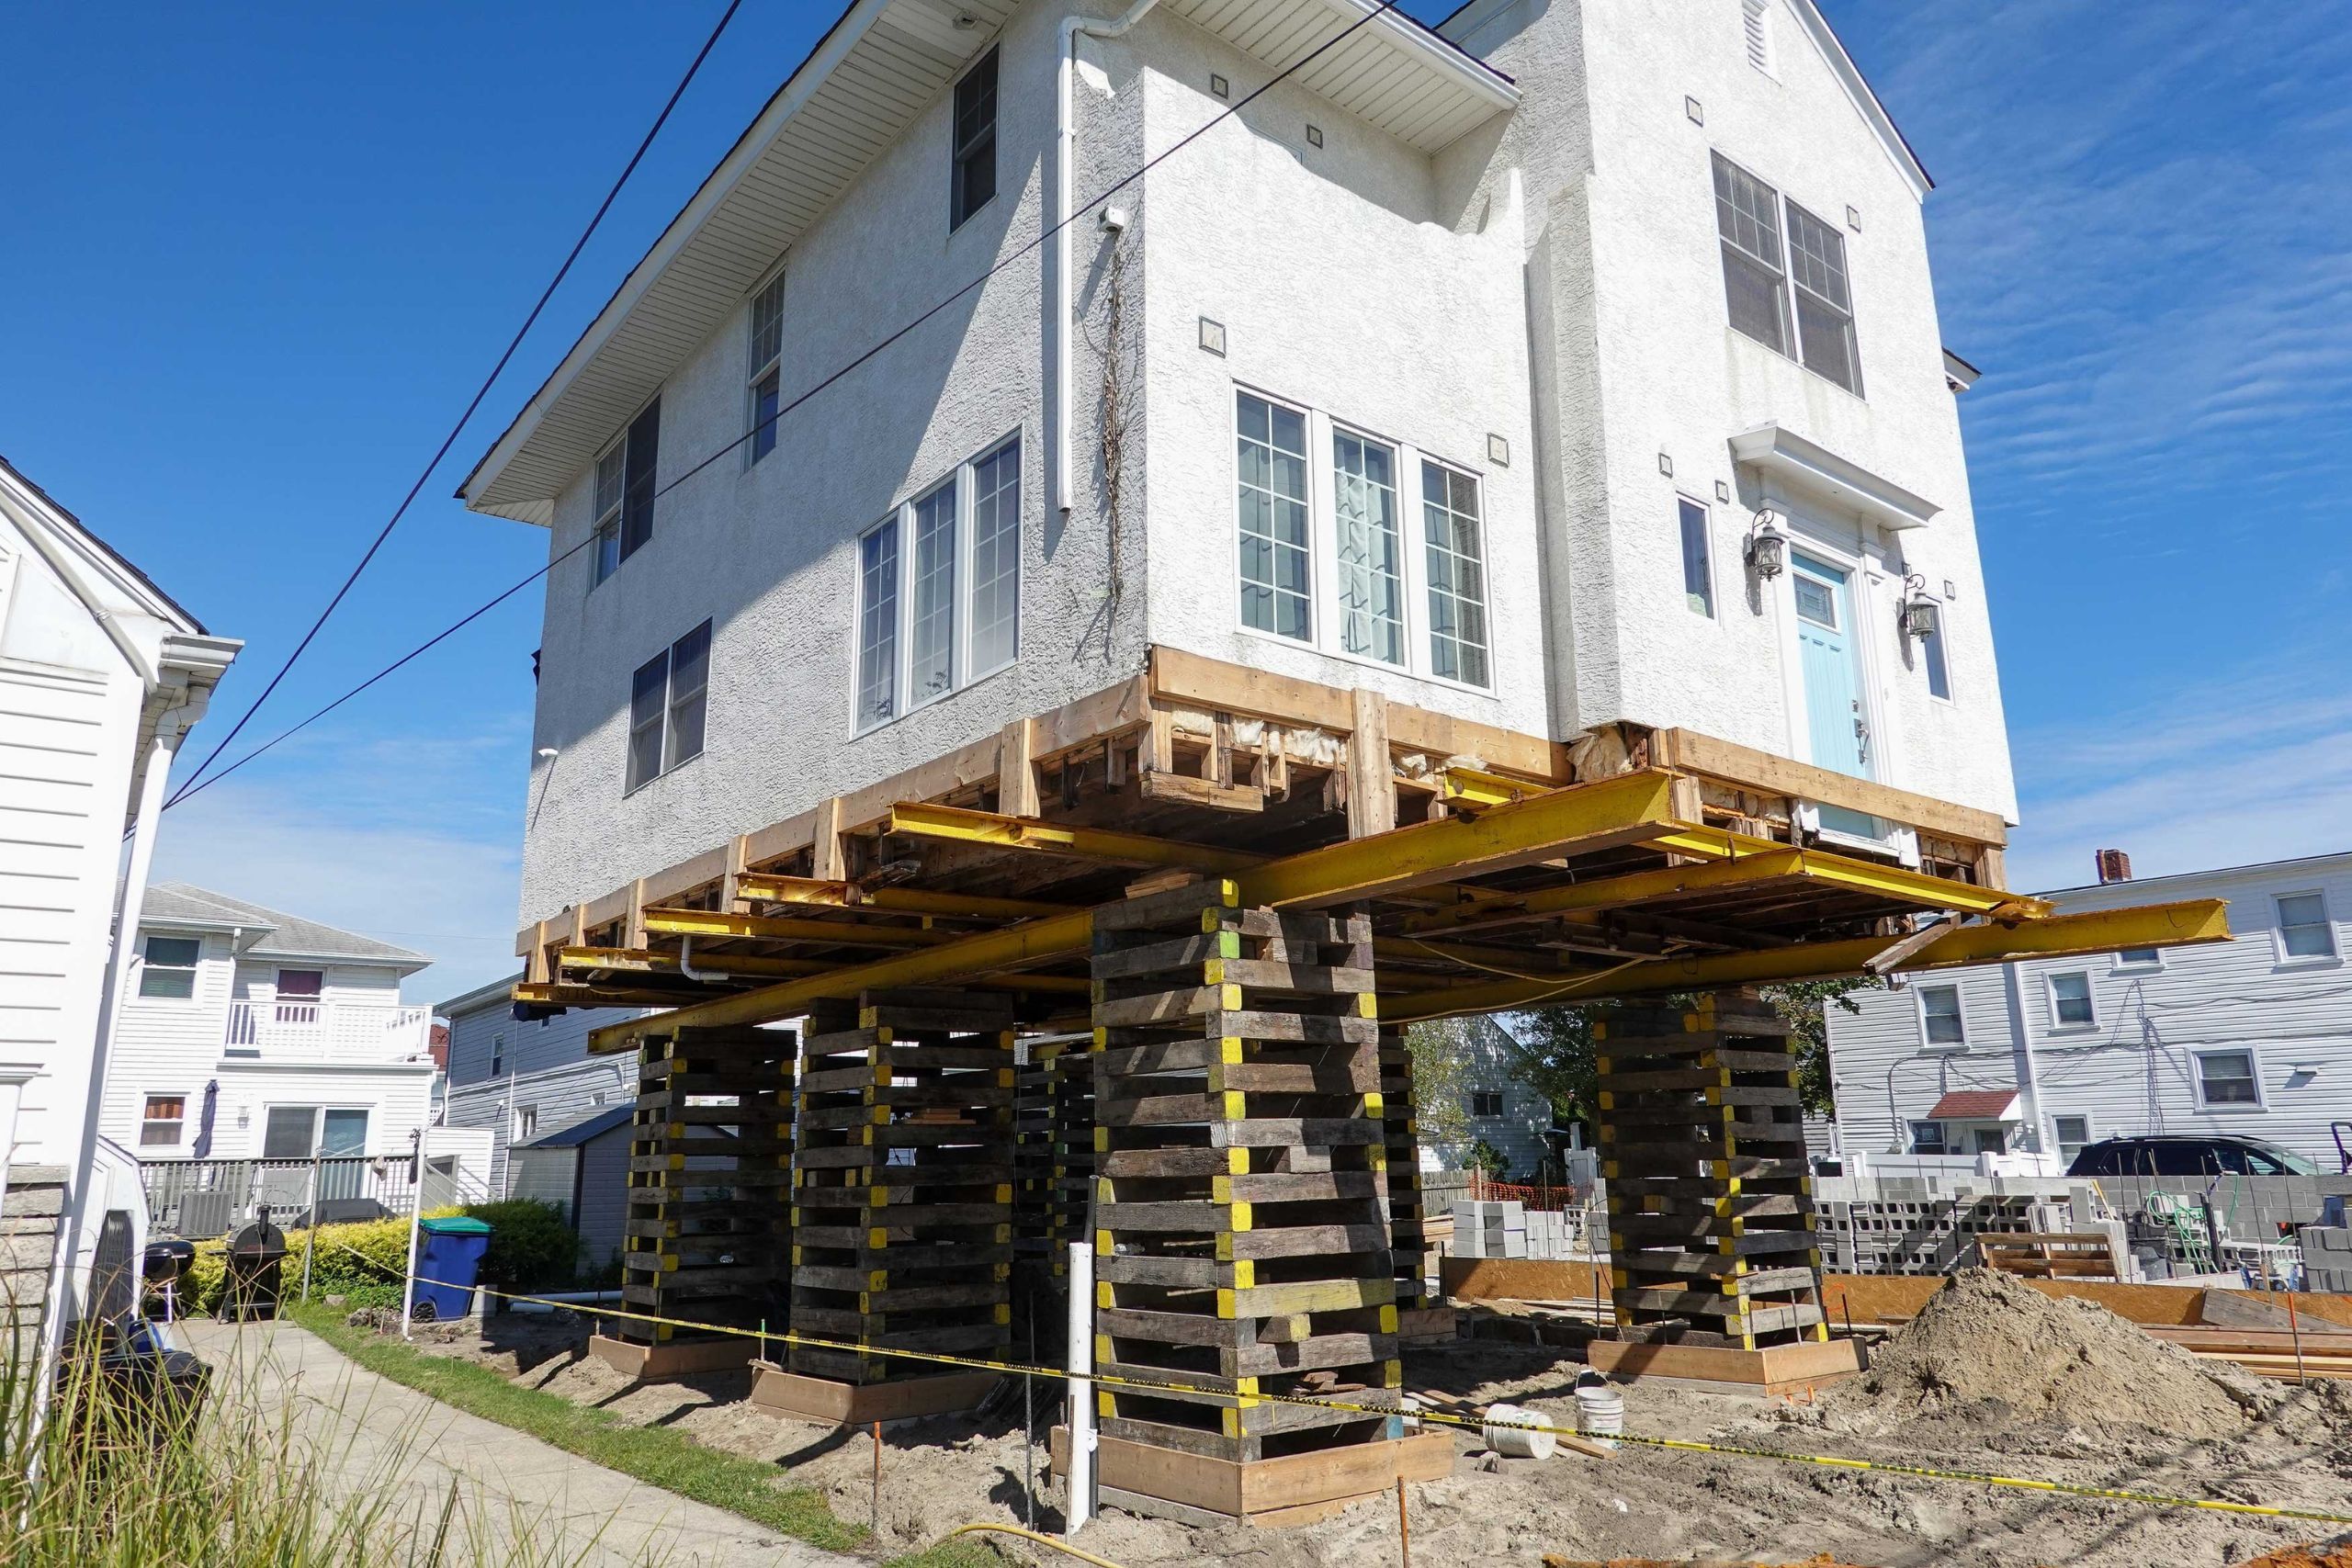 A team of professionals using specialized equipment to raise a house in Florida, preparing it for elevation and renovation